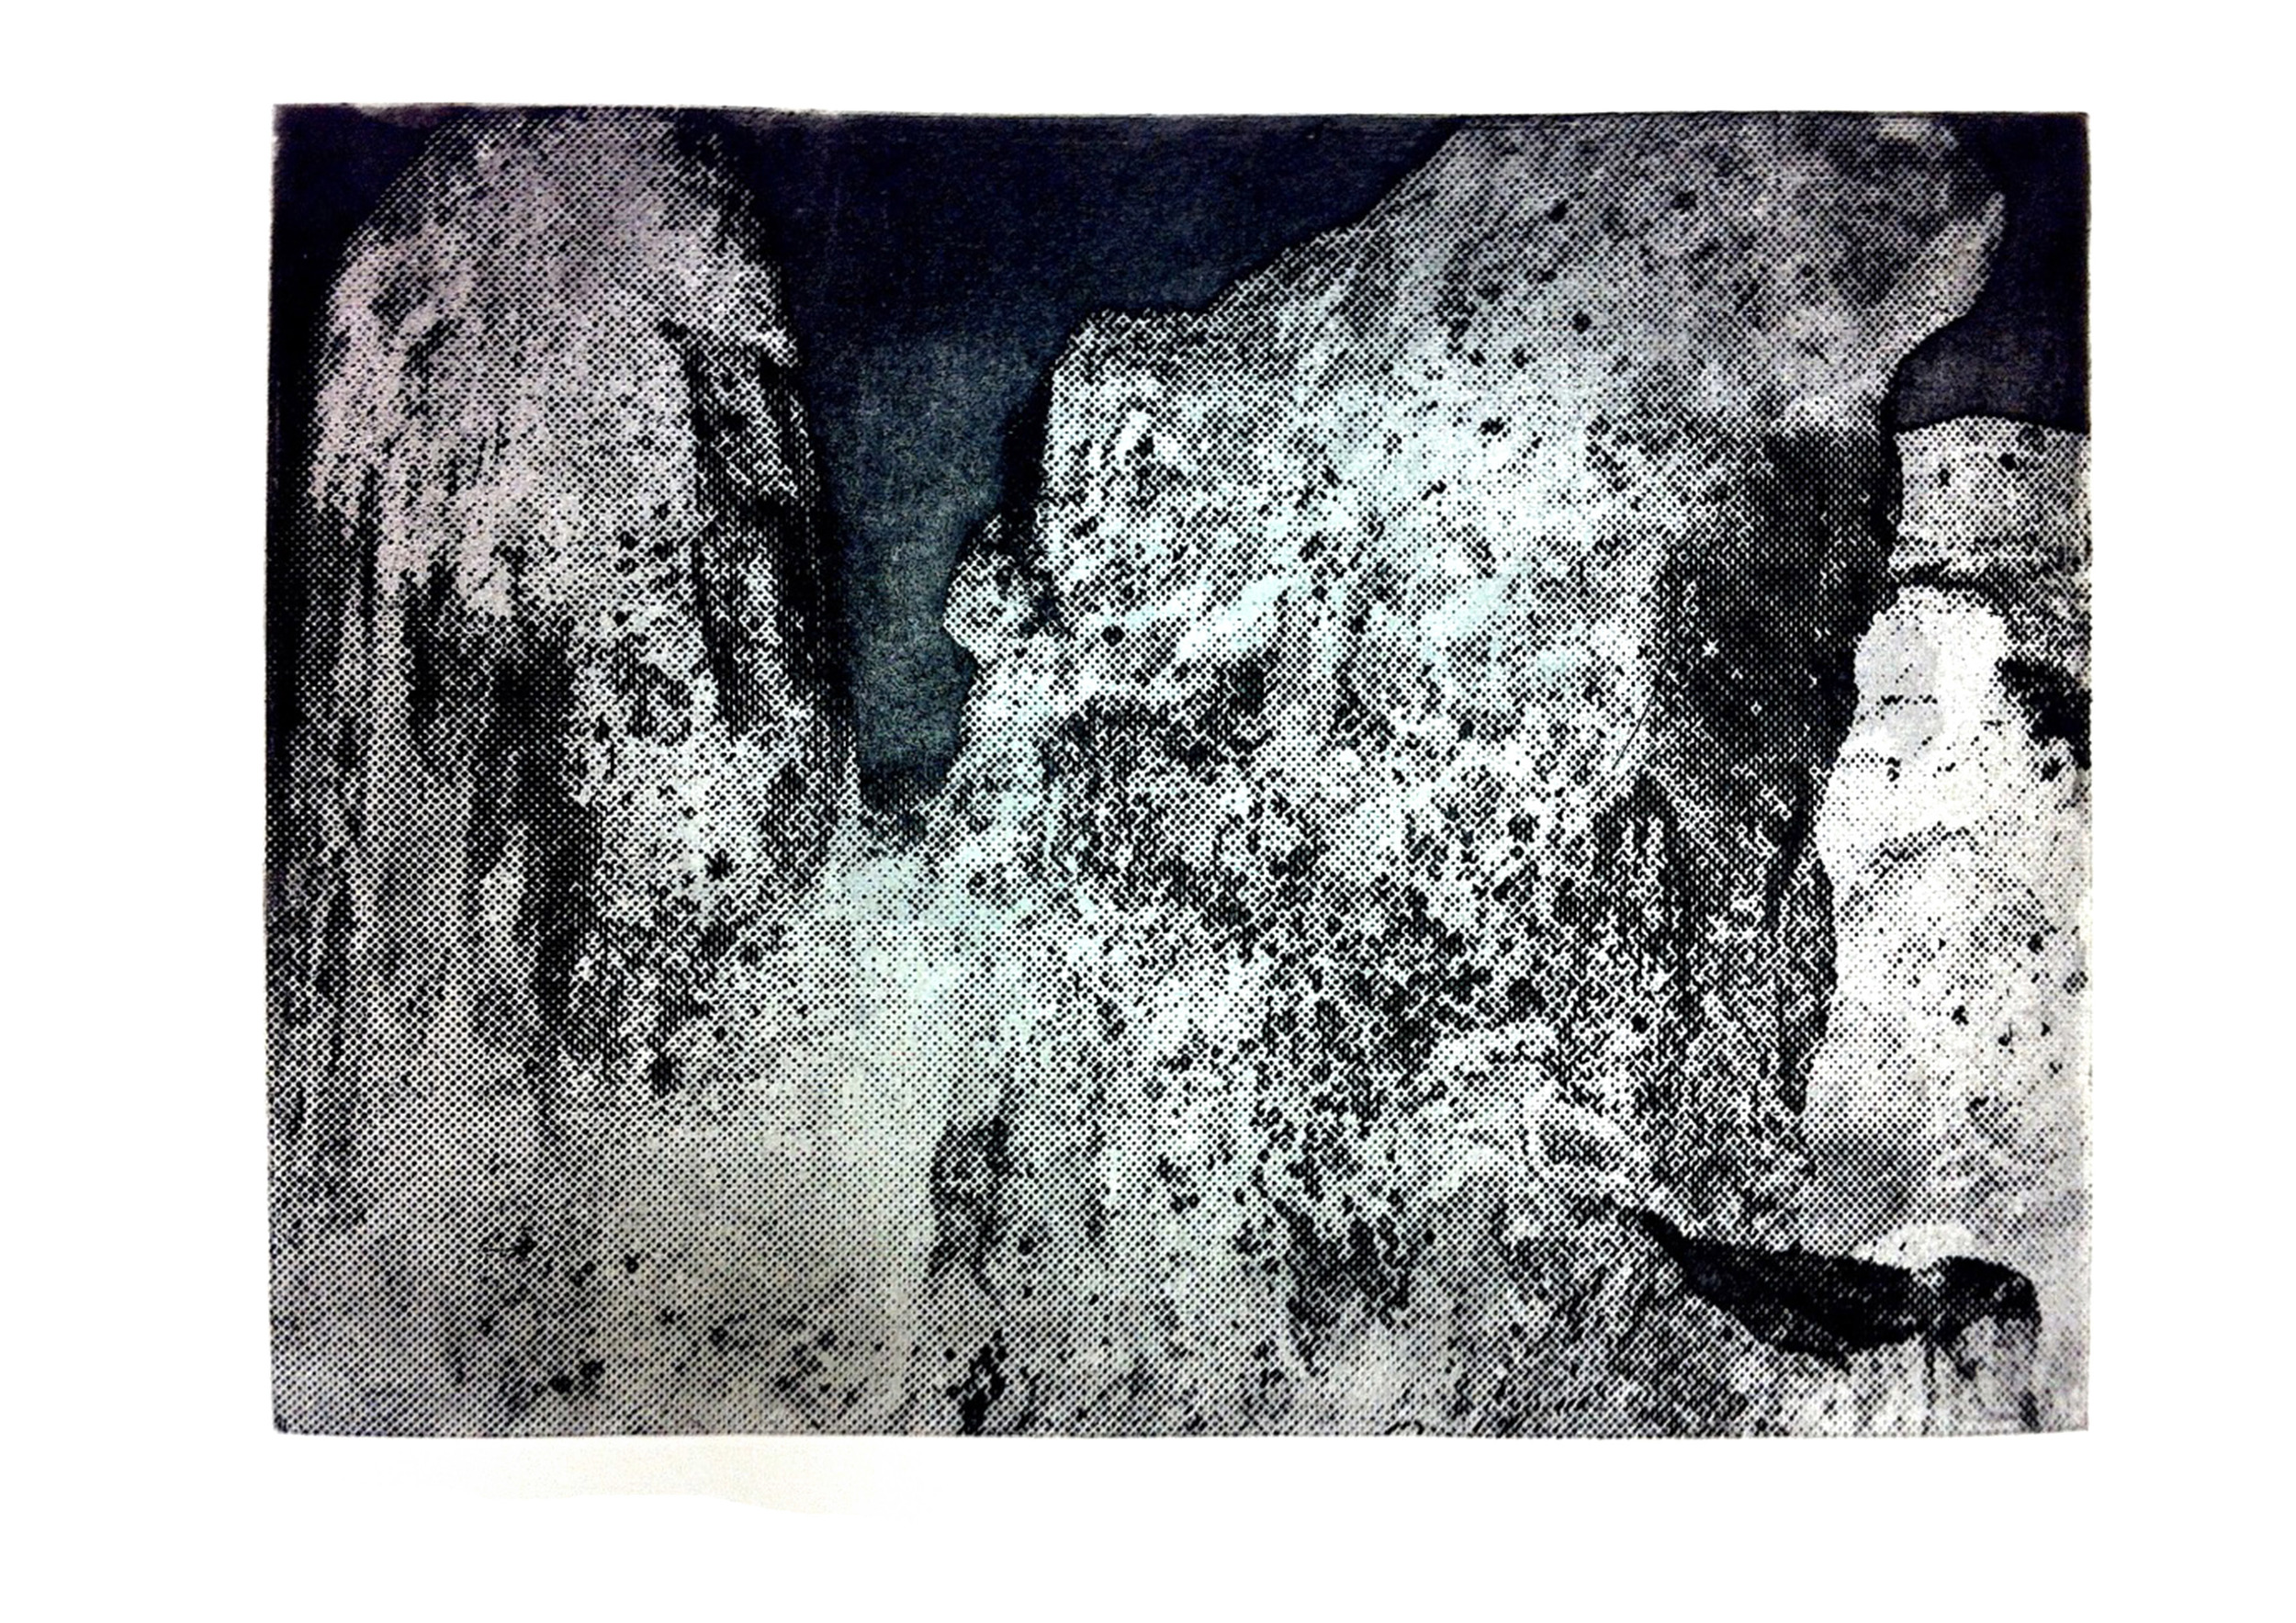 'Megaliths at West Kennet Long Barrow, Avebury'